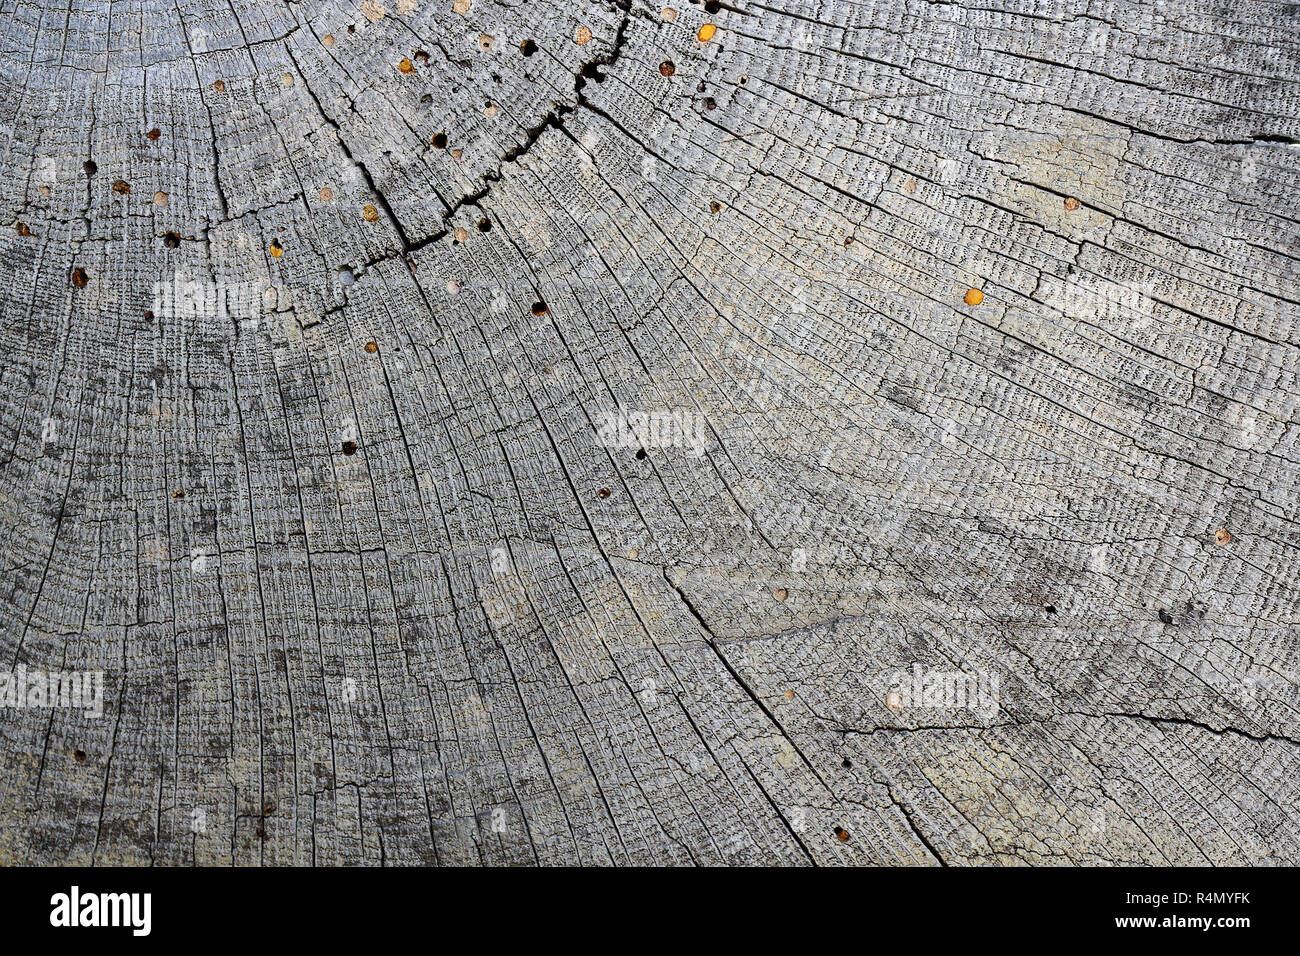 oak cross section texture ready for your design, closeup of annual rings, cracked surface Stock Photo